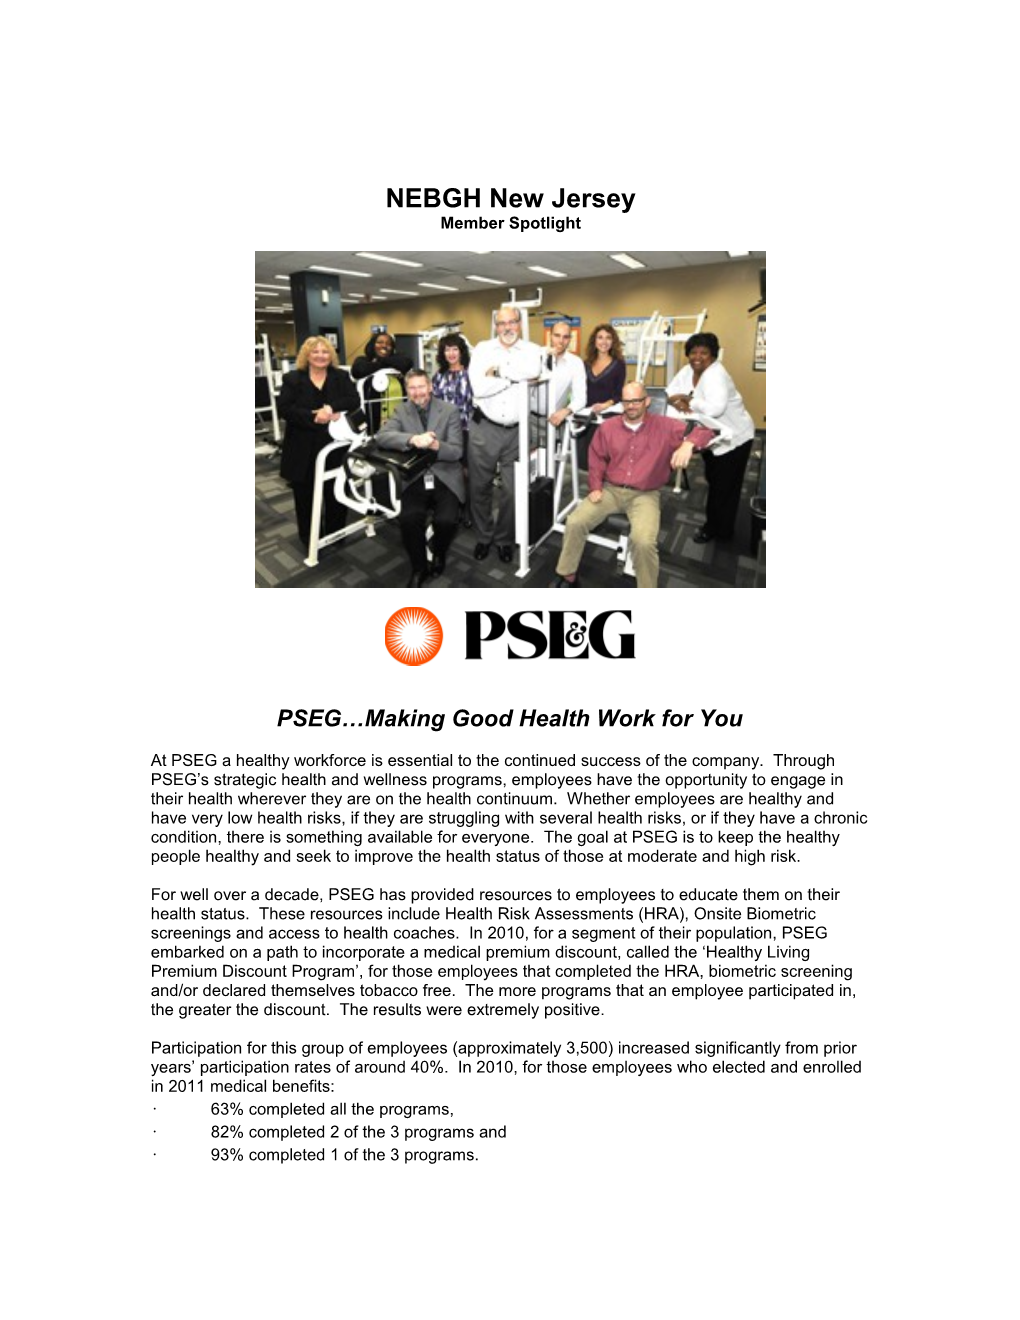 At PSEG a Healthy Workforce Is Essential to the Continued Success of the Company